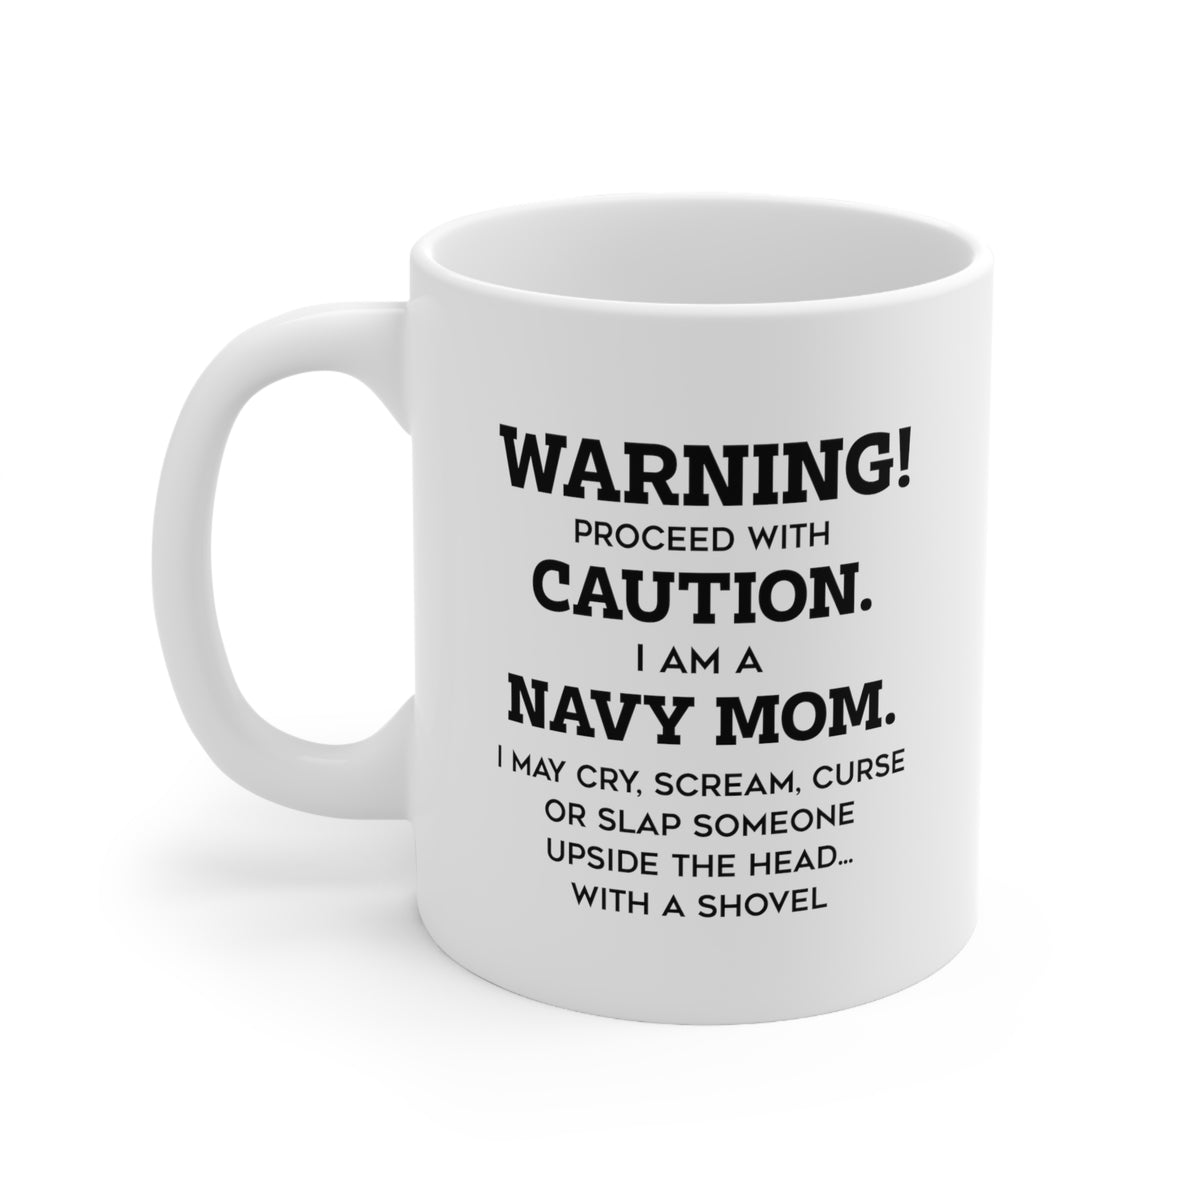 Warning! Proceed With Caution. I Am A Navy Mom. I May Cry, Scream, Curse Or Slap - Funny Navy Mom Ceramic Coffee Cup